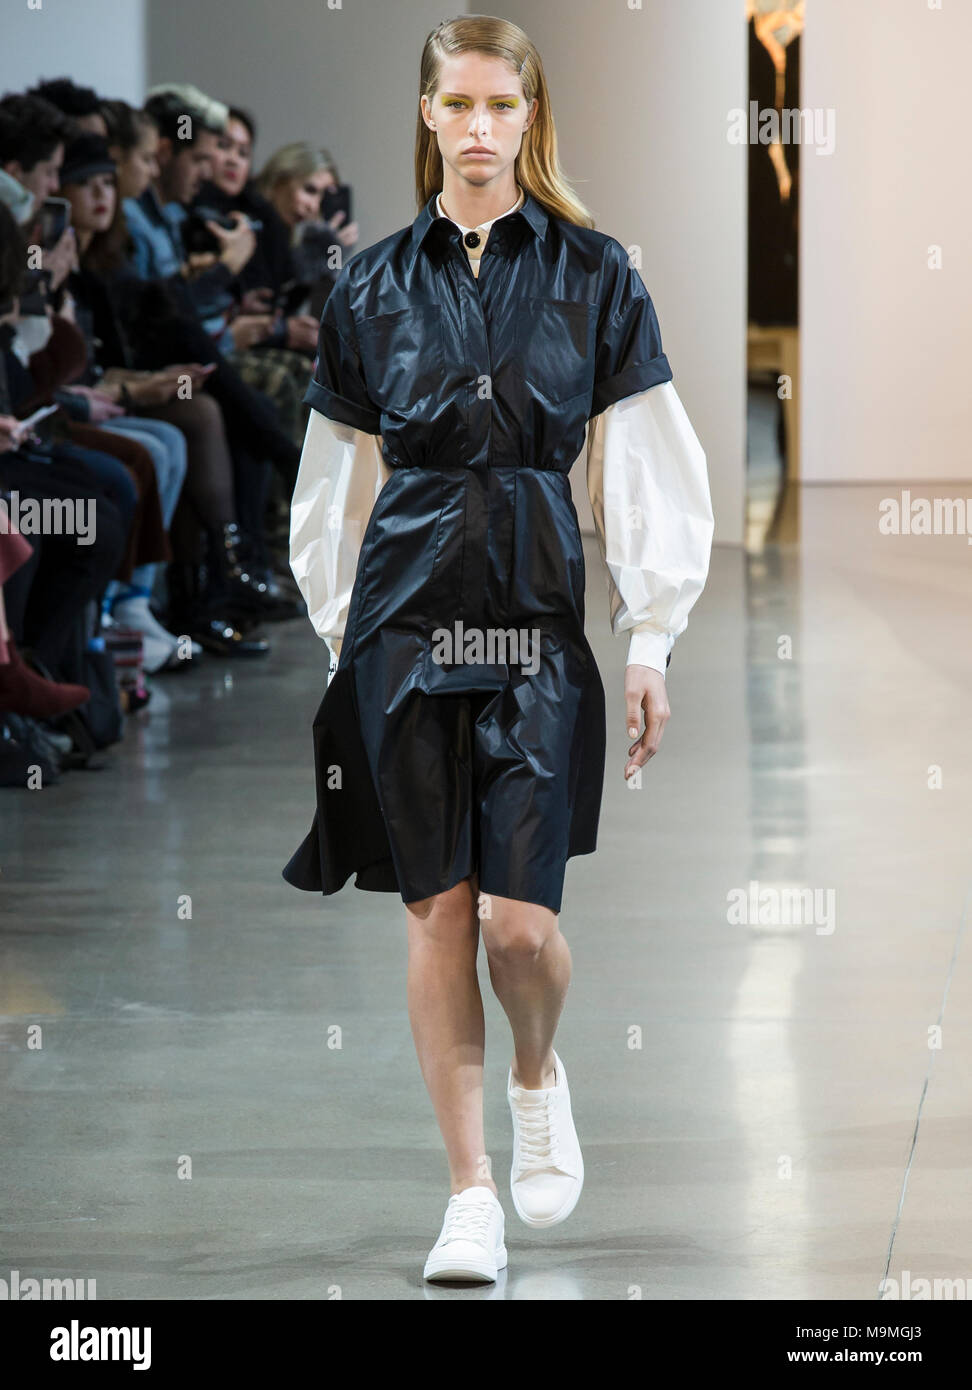 NEW YORK, NY - February 08, 2018: Abby Champion walks the runway at the Noon by Noor Fall Winter 2018 fashion show during York Fashion Week Stock Photo - Alamy